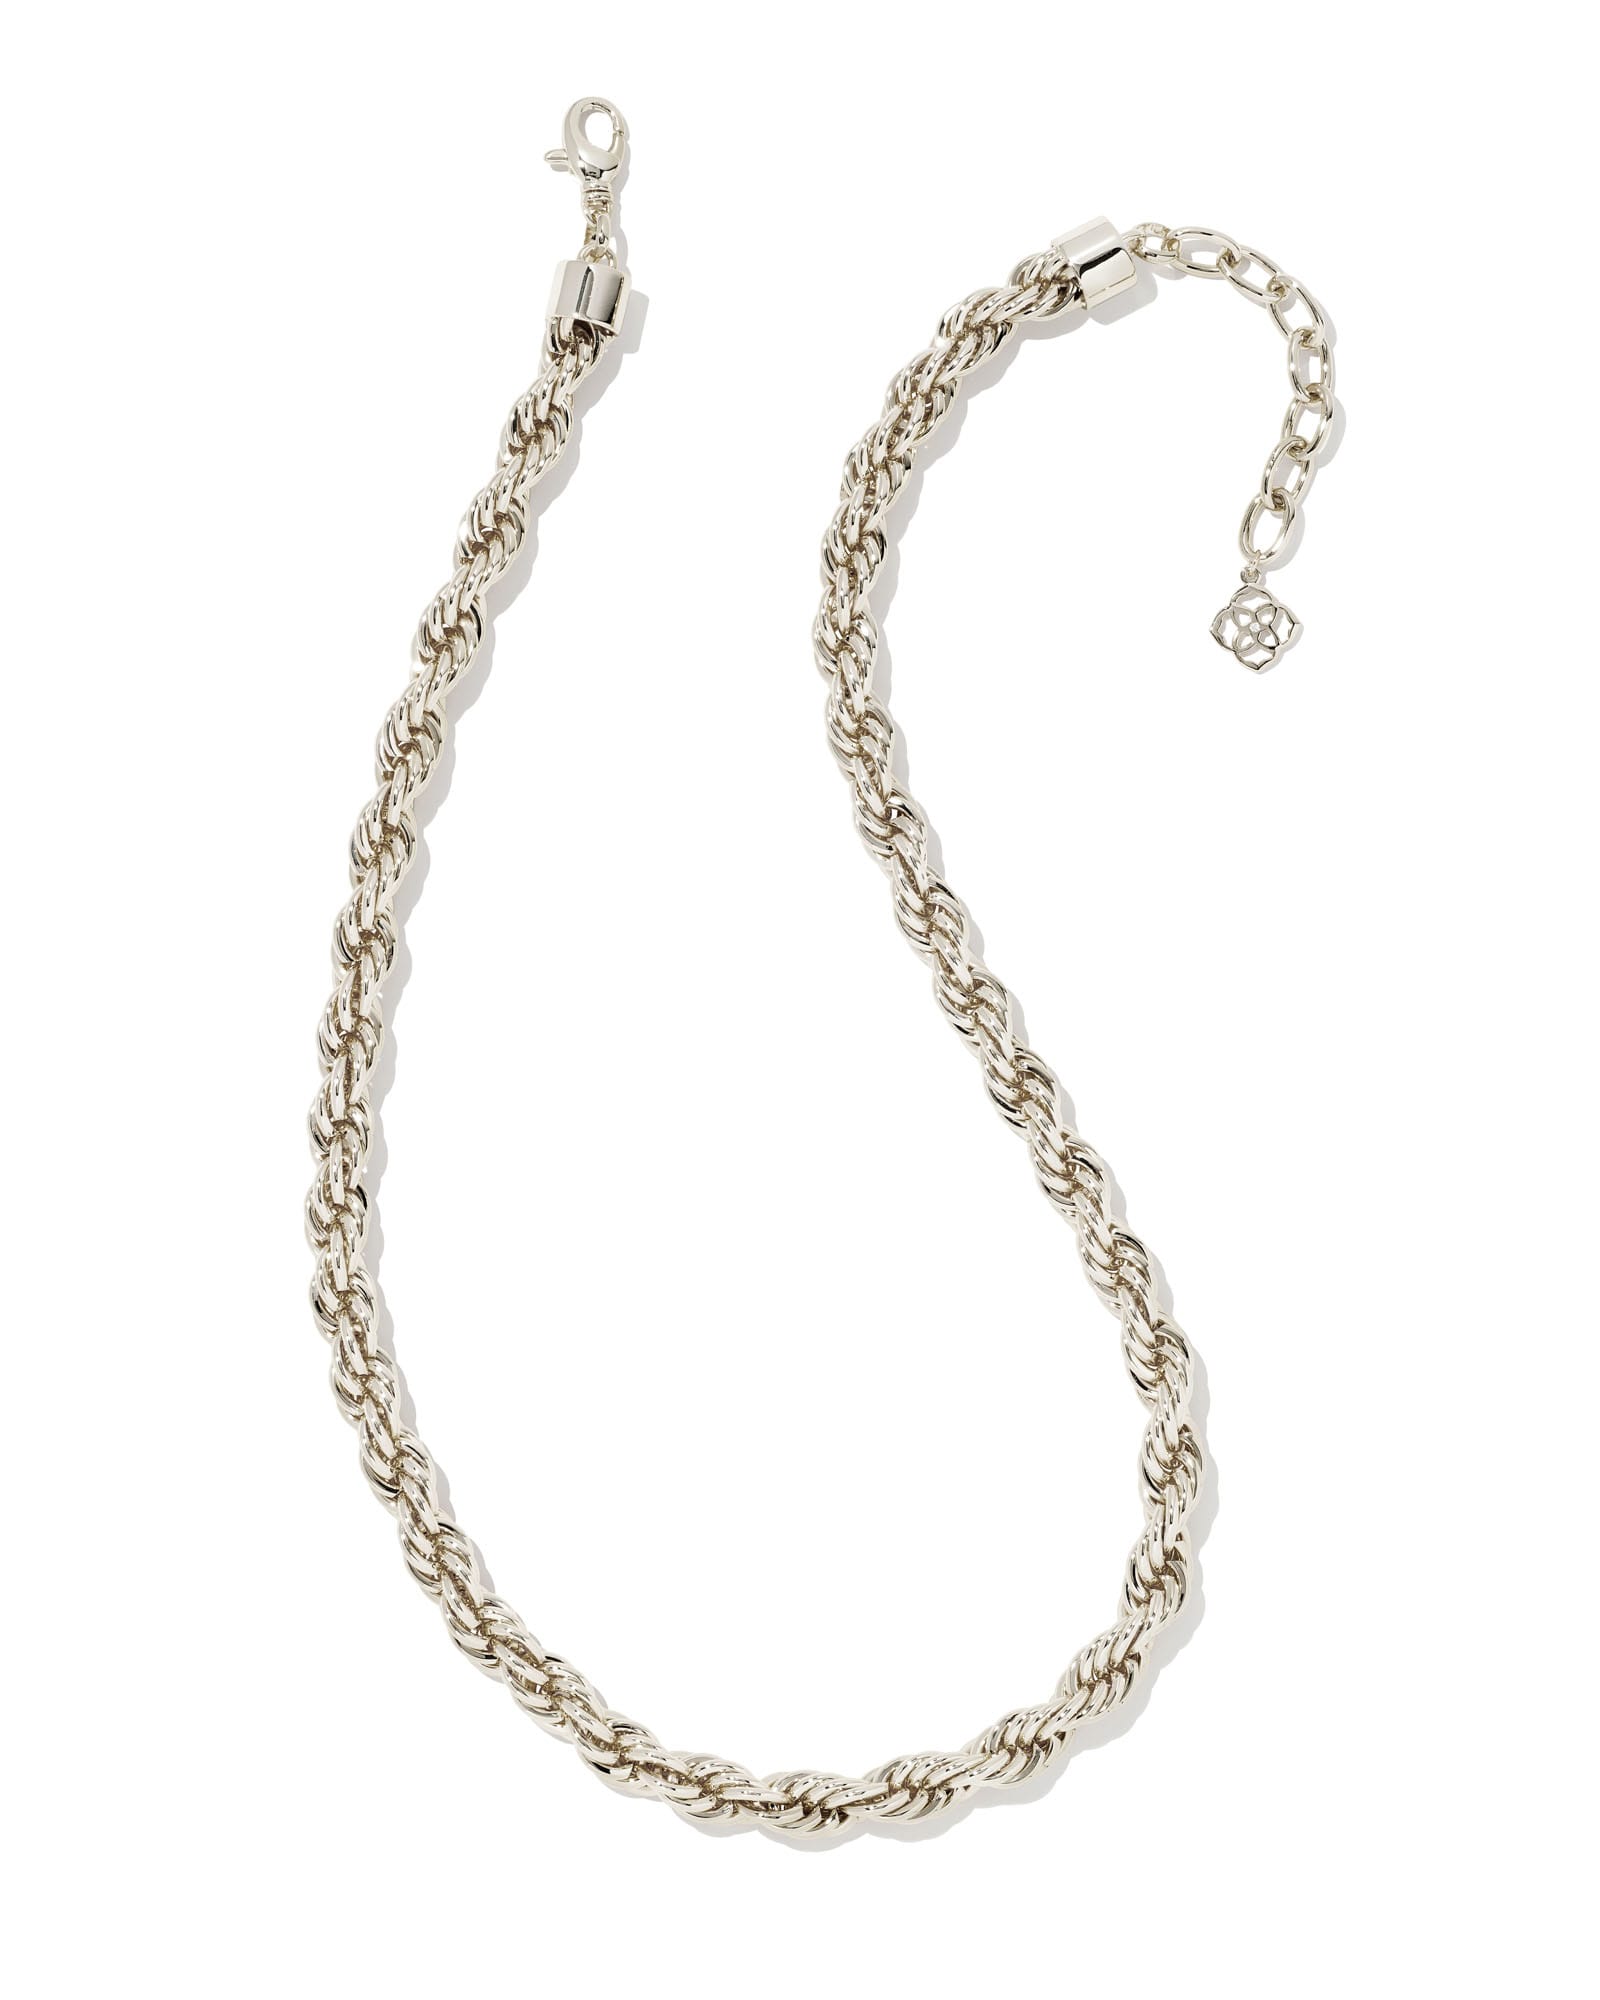 Cailin Silver Pendant Necklace in White Crystal